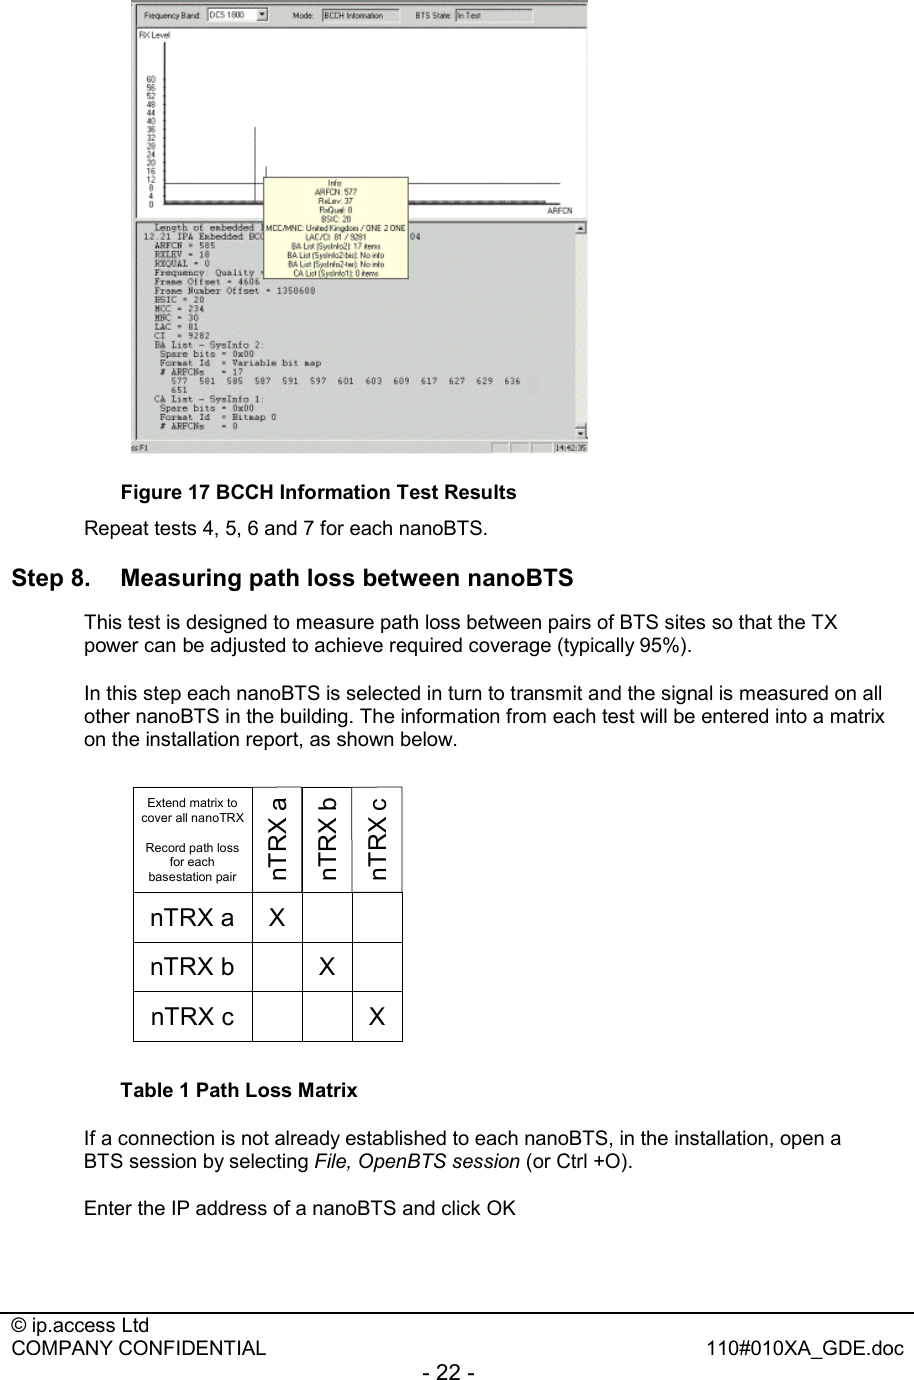  © ip.access Ltd   COMPANY CONFIDENTIAL  110#010XA_GDE.doc - 22 -       Figure 17 BCCH Information Test Results Repeat tests 4, 5, 6 and 7 for each nanoBTS. Step 8.  Measuring path loss between nanoBTS This test is designed to measure path loss between pairs of BTS sites so that the TX power can be adjusted to achieve required coverage (typically 95%). In this step each nanoBTS is selected in turn to transmit and the signal is measured on all other nanoBTS in the building. The information from each test will be entered into a matrix on the installation report, as shown below. nTRX anTRX bnTRX cXXXnTRX anTRX bnTRX cExtend matrix to cover all nanoTRXRecord path loss for each basestation pair Table 1 Path Loss Matrix If a connection is not already established to each nanoBTS, in the installation, open a BTS session by selecting File, OpenBTS session (or Ctrl +O). Enter the IP address of a nanoBTS and click OK 